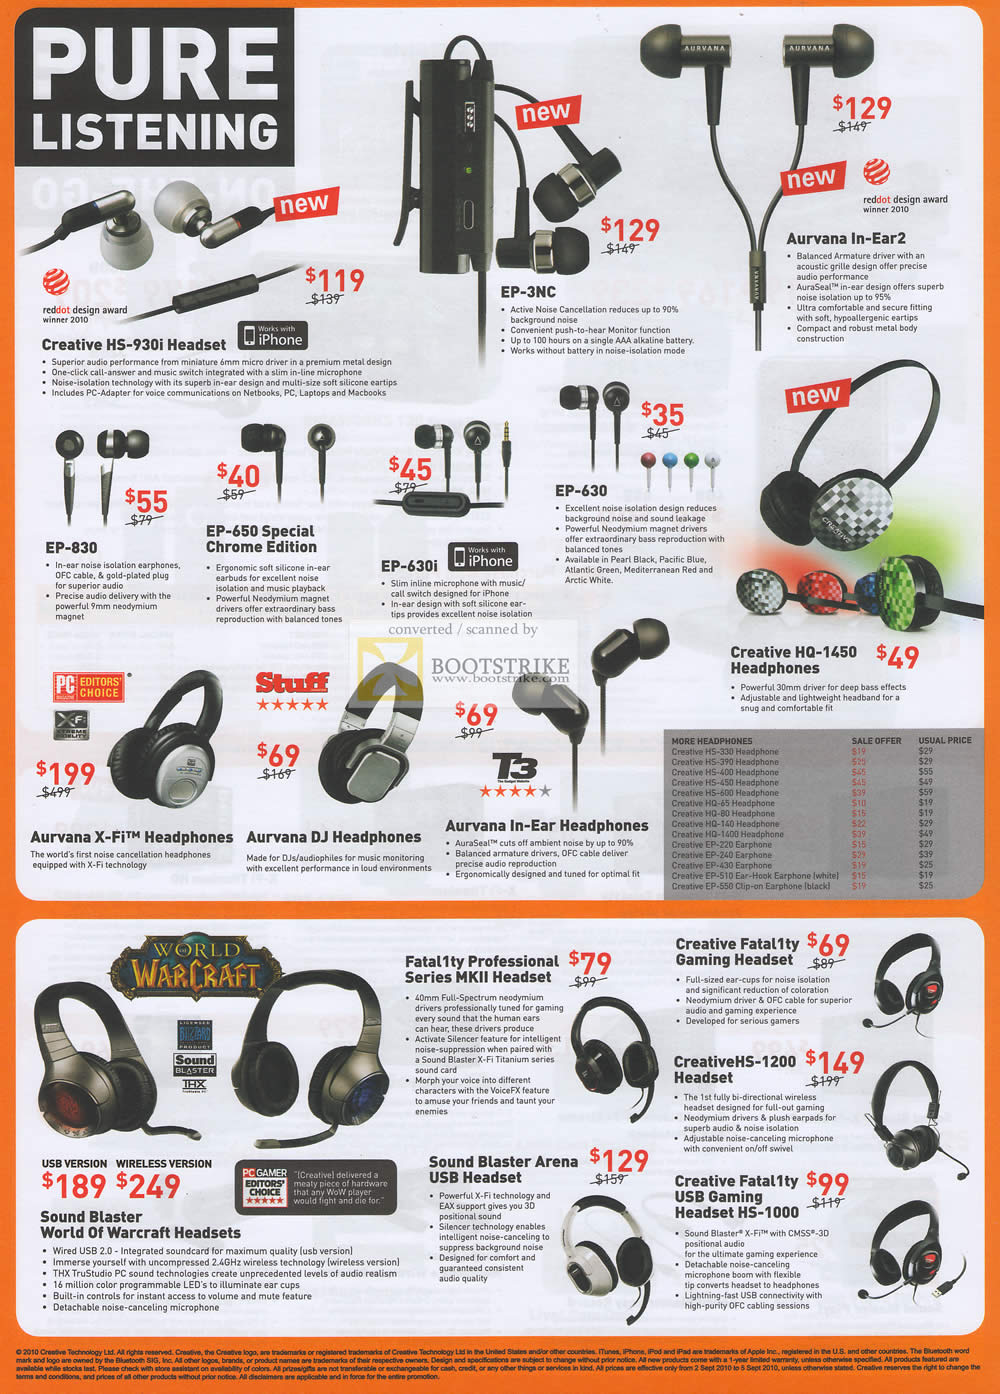 Comex 2010 price list image brochure of Creative Earphones HS EP Aurvana Chrome HQ 1450 X Fi DJ In Ear World Of Warcraft Fatal1ty Professional Series MKII Arena USB